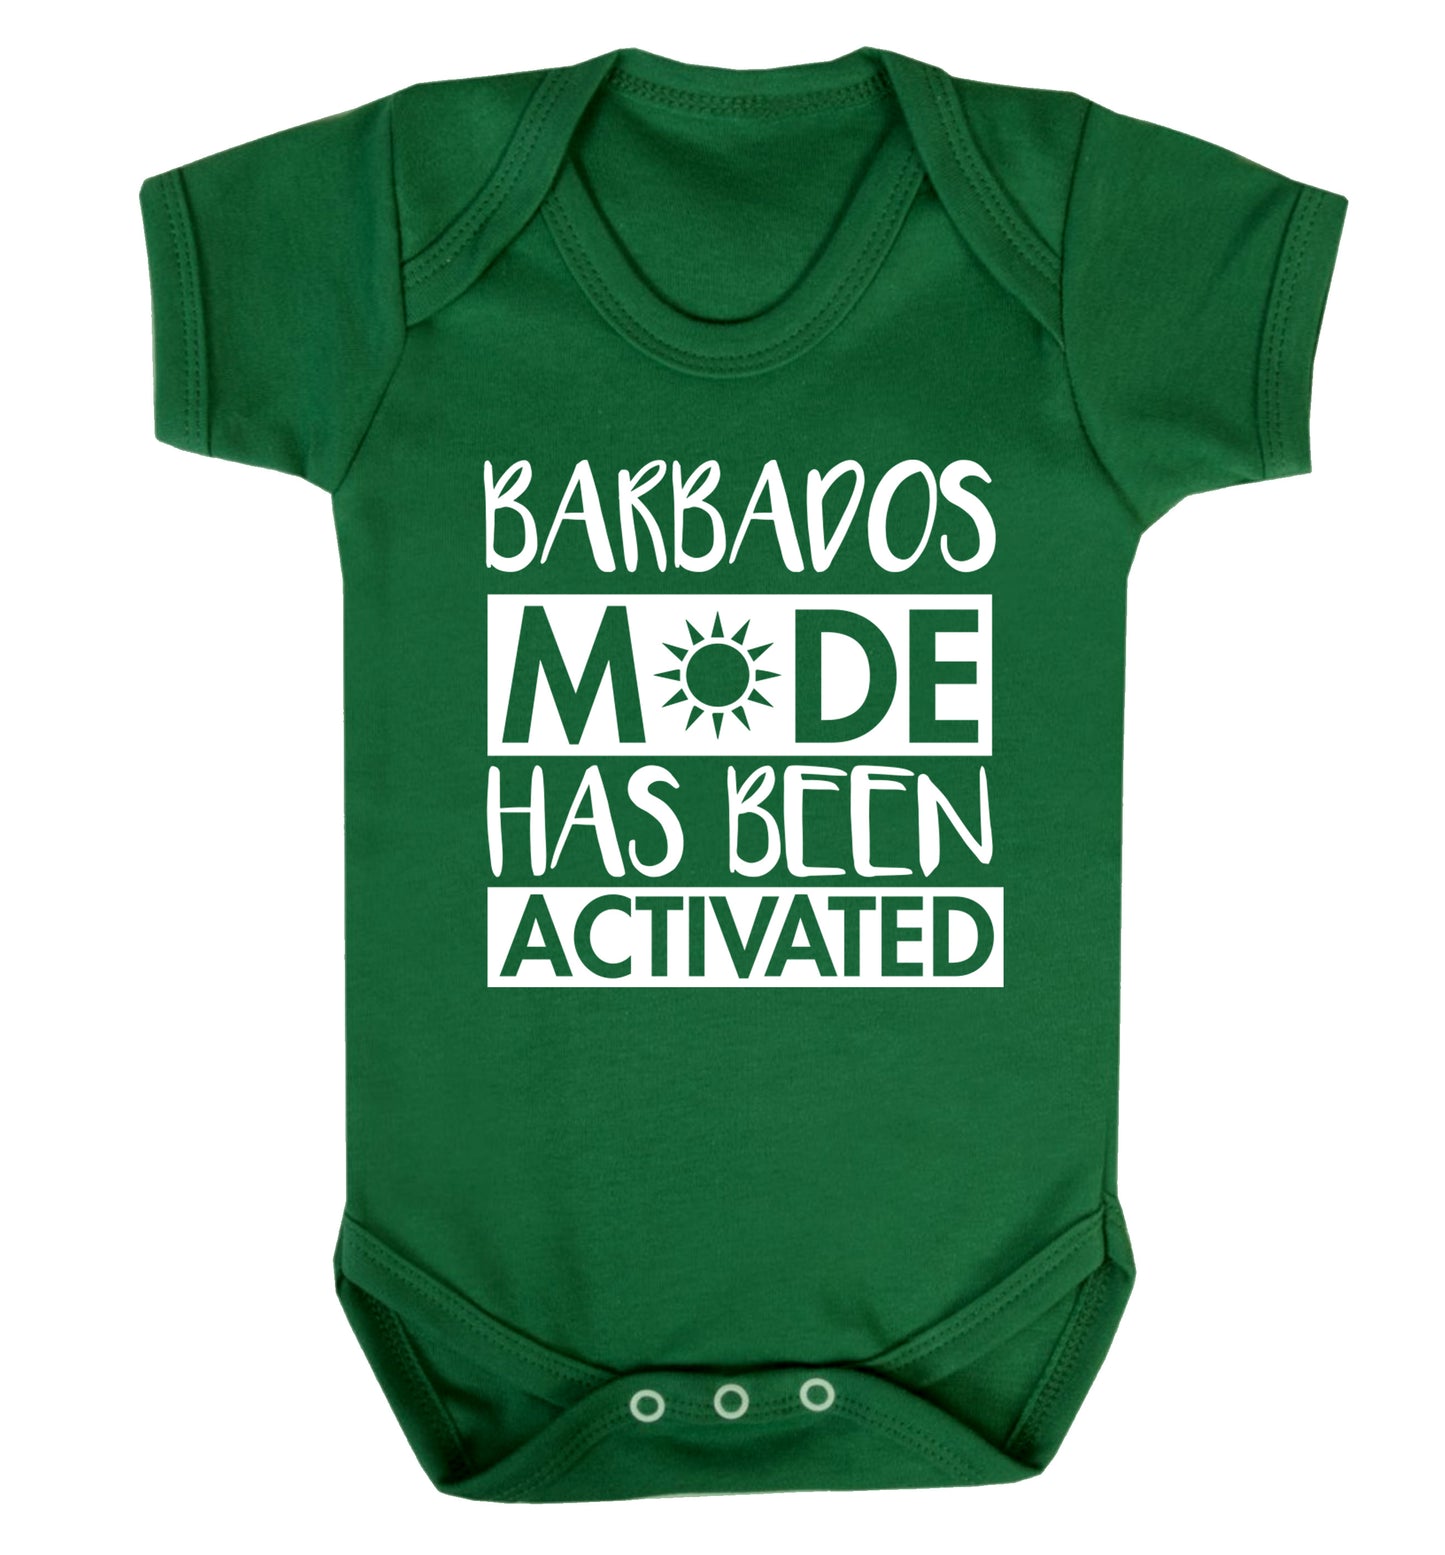 Barbados mode has been activated Baby Vest green 18-24 months